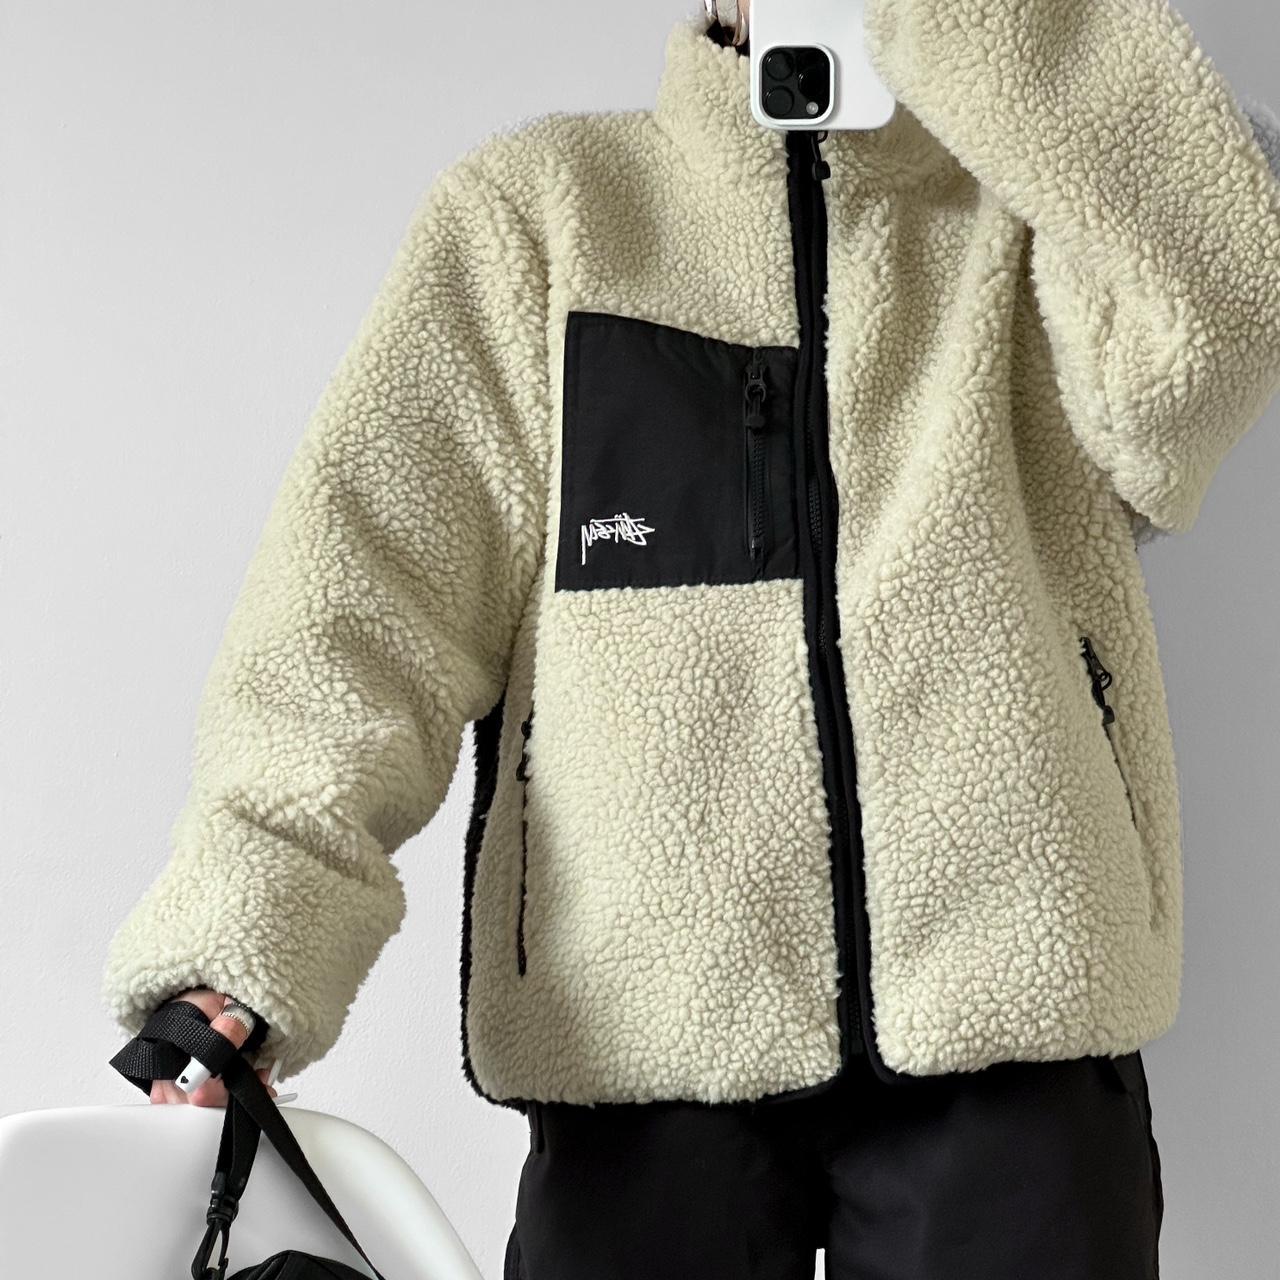 Stussy 8 ball sherpa reversible jacket, New with tags...